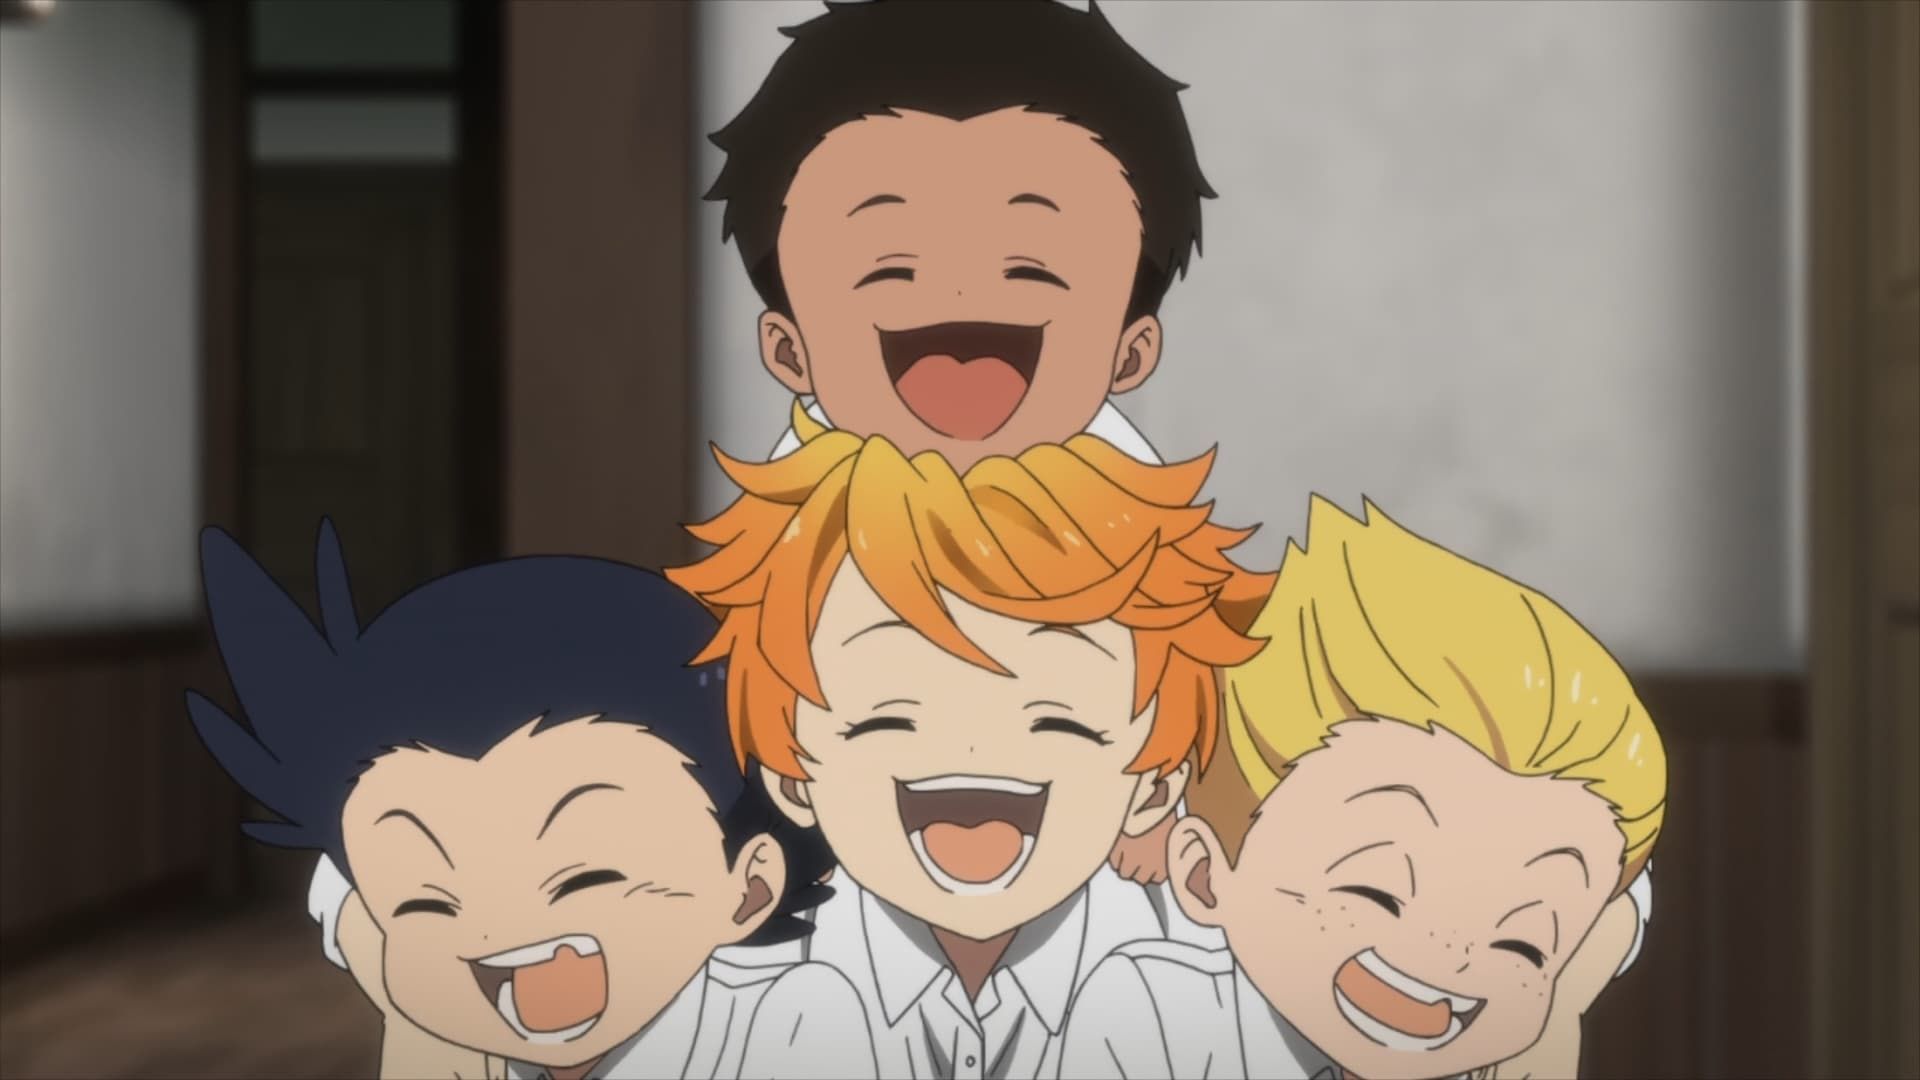 Watch The Promised Neverland Episode 3 Online - 181045